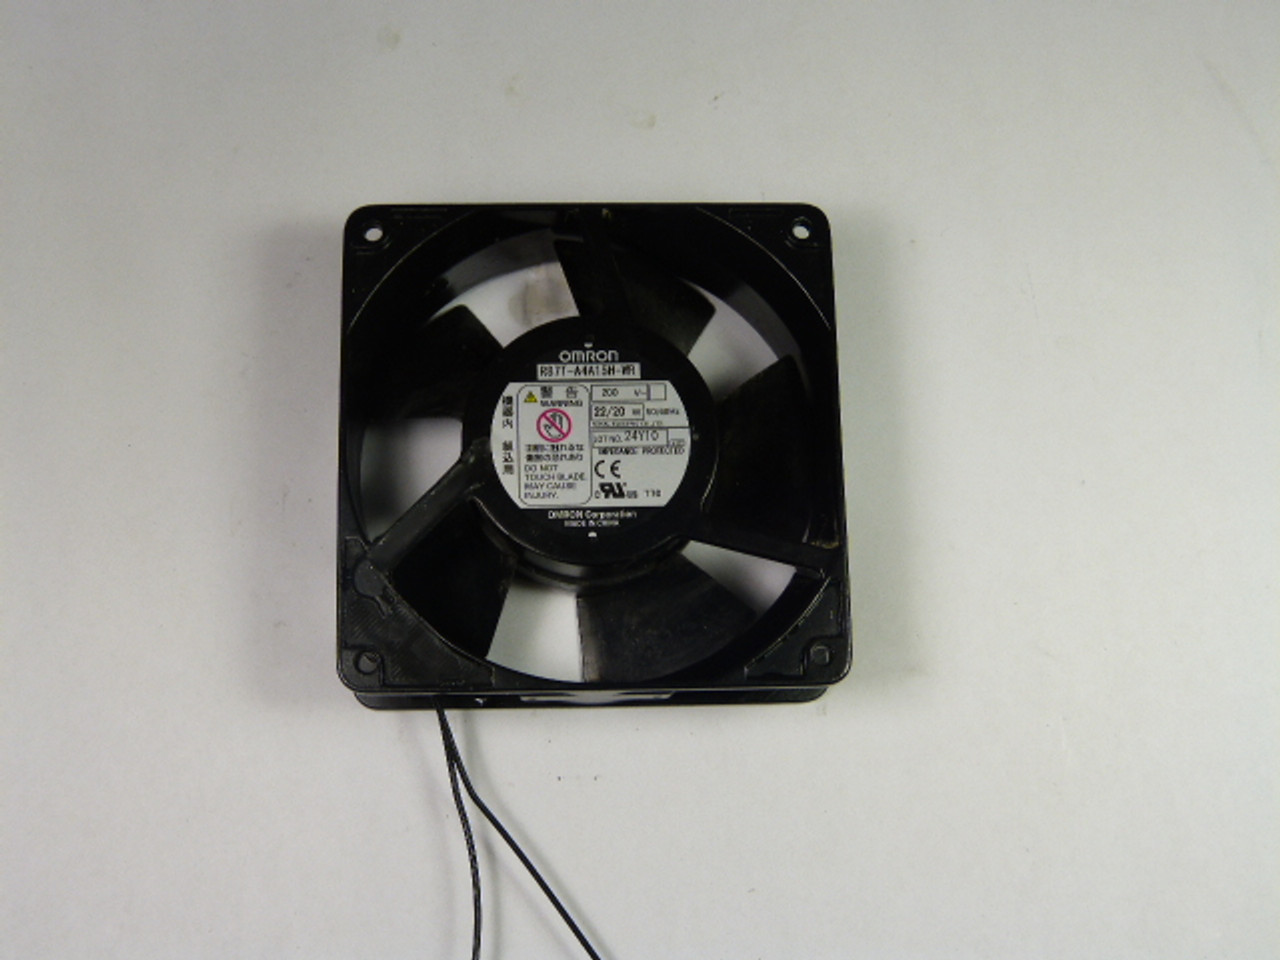 Omron R87T-A4A15H-WR Waterproof Cooling Fan 200V 20W USED